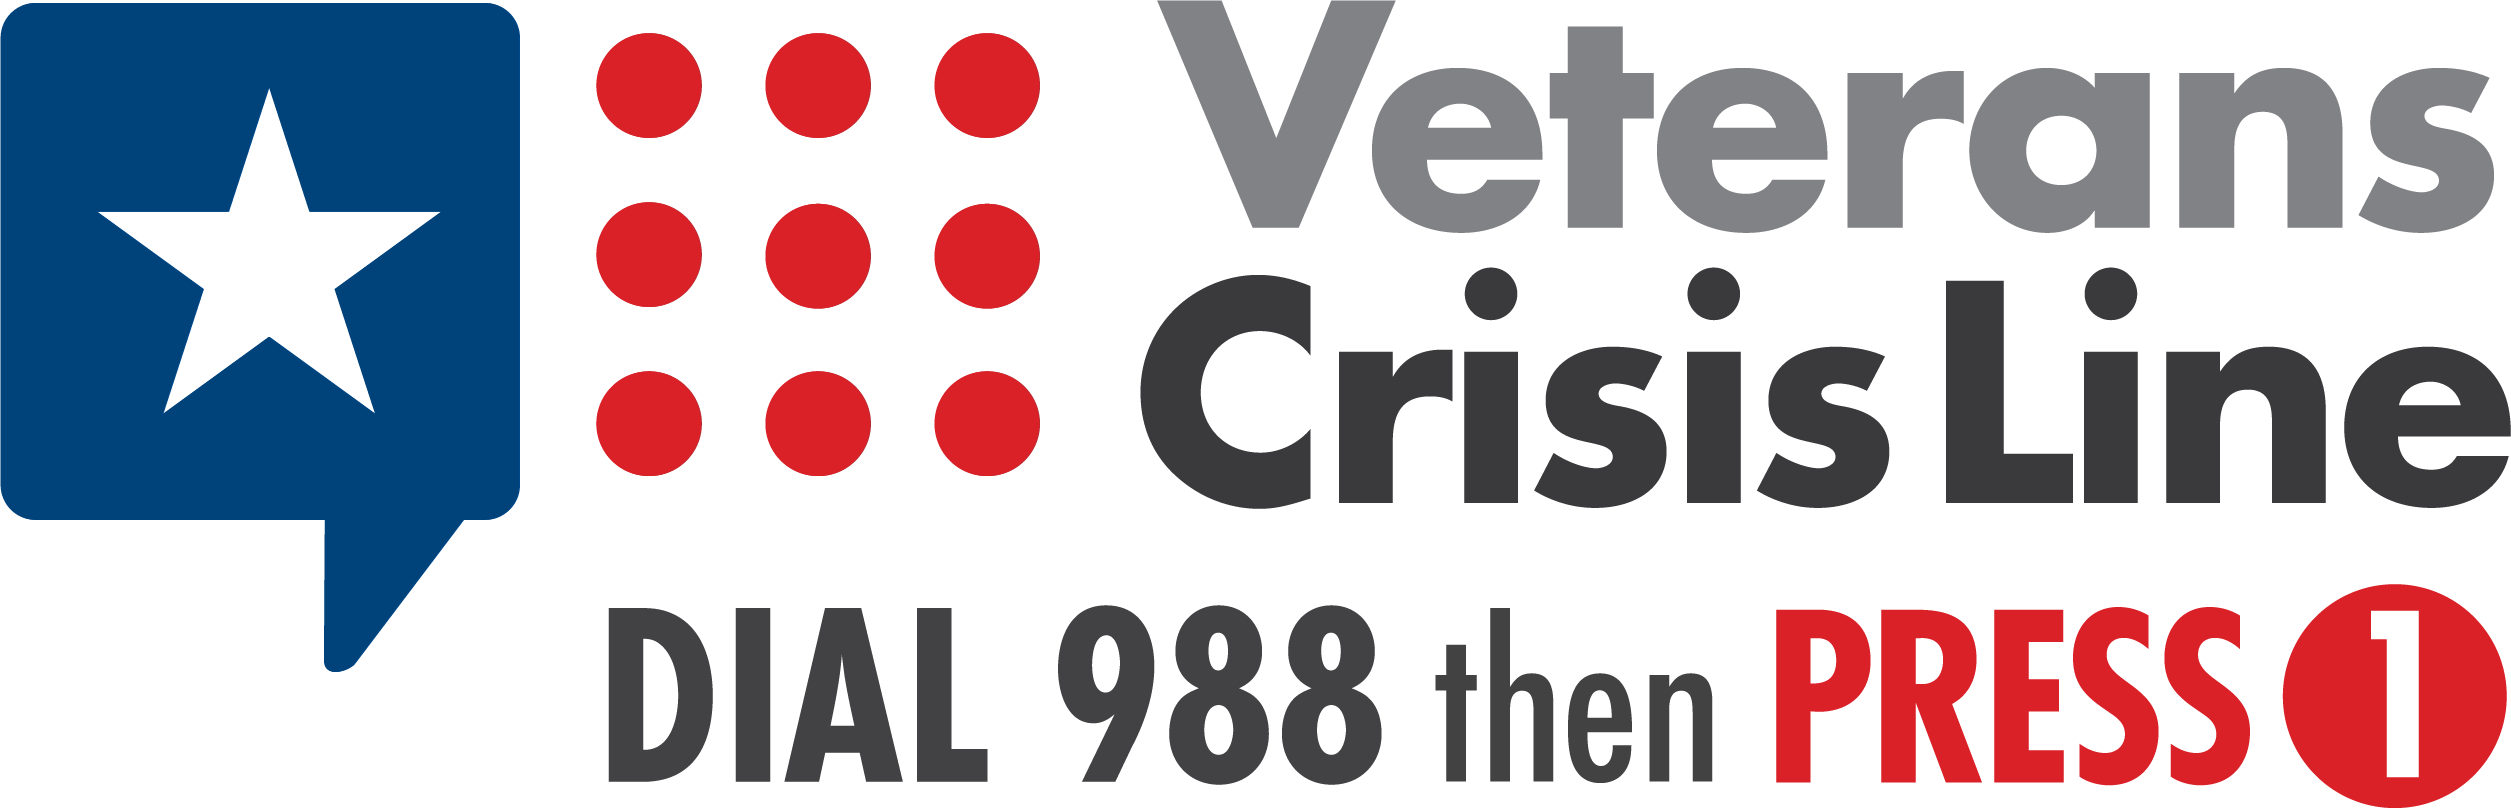 Image to Call the Veterans' Crisis Line at 1-800-273-8255 and Press 1.